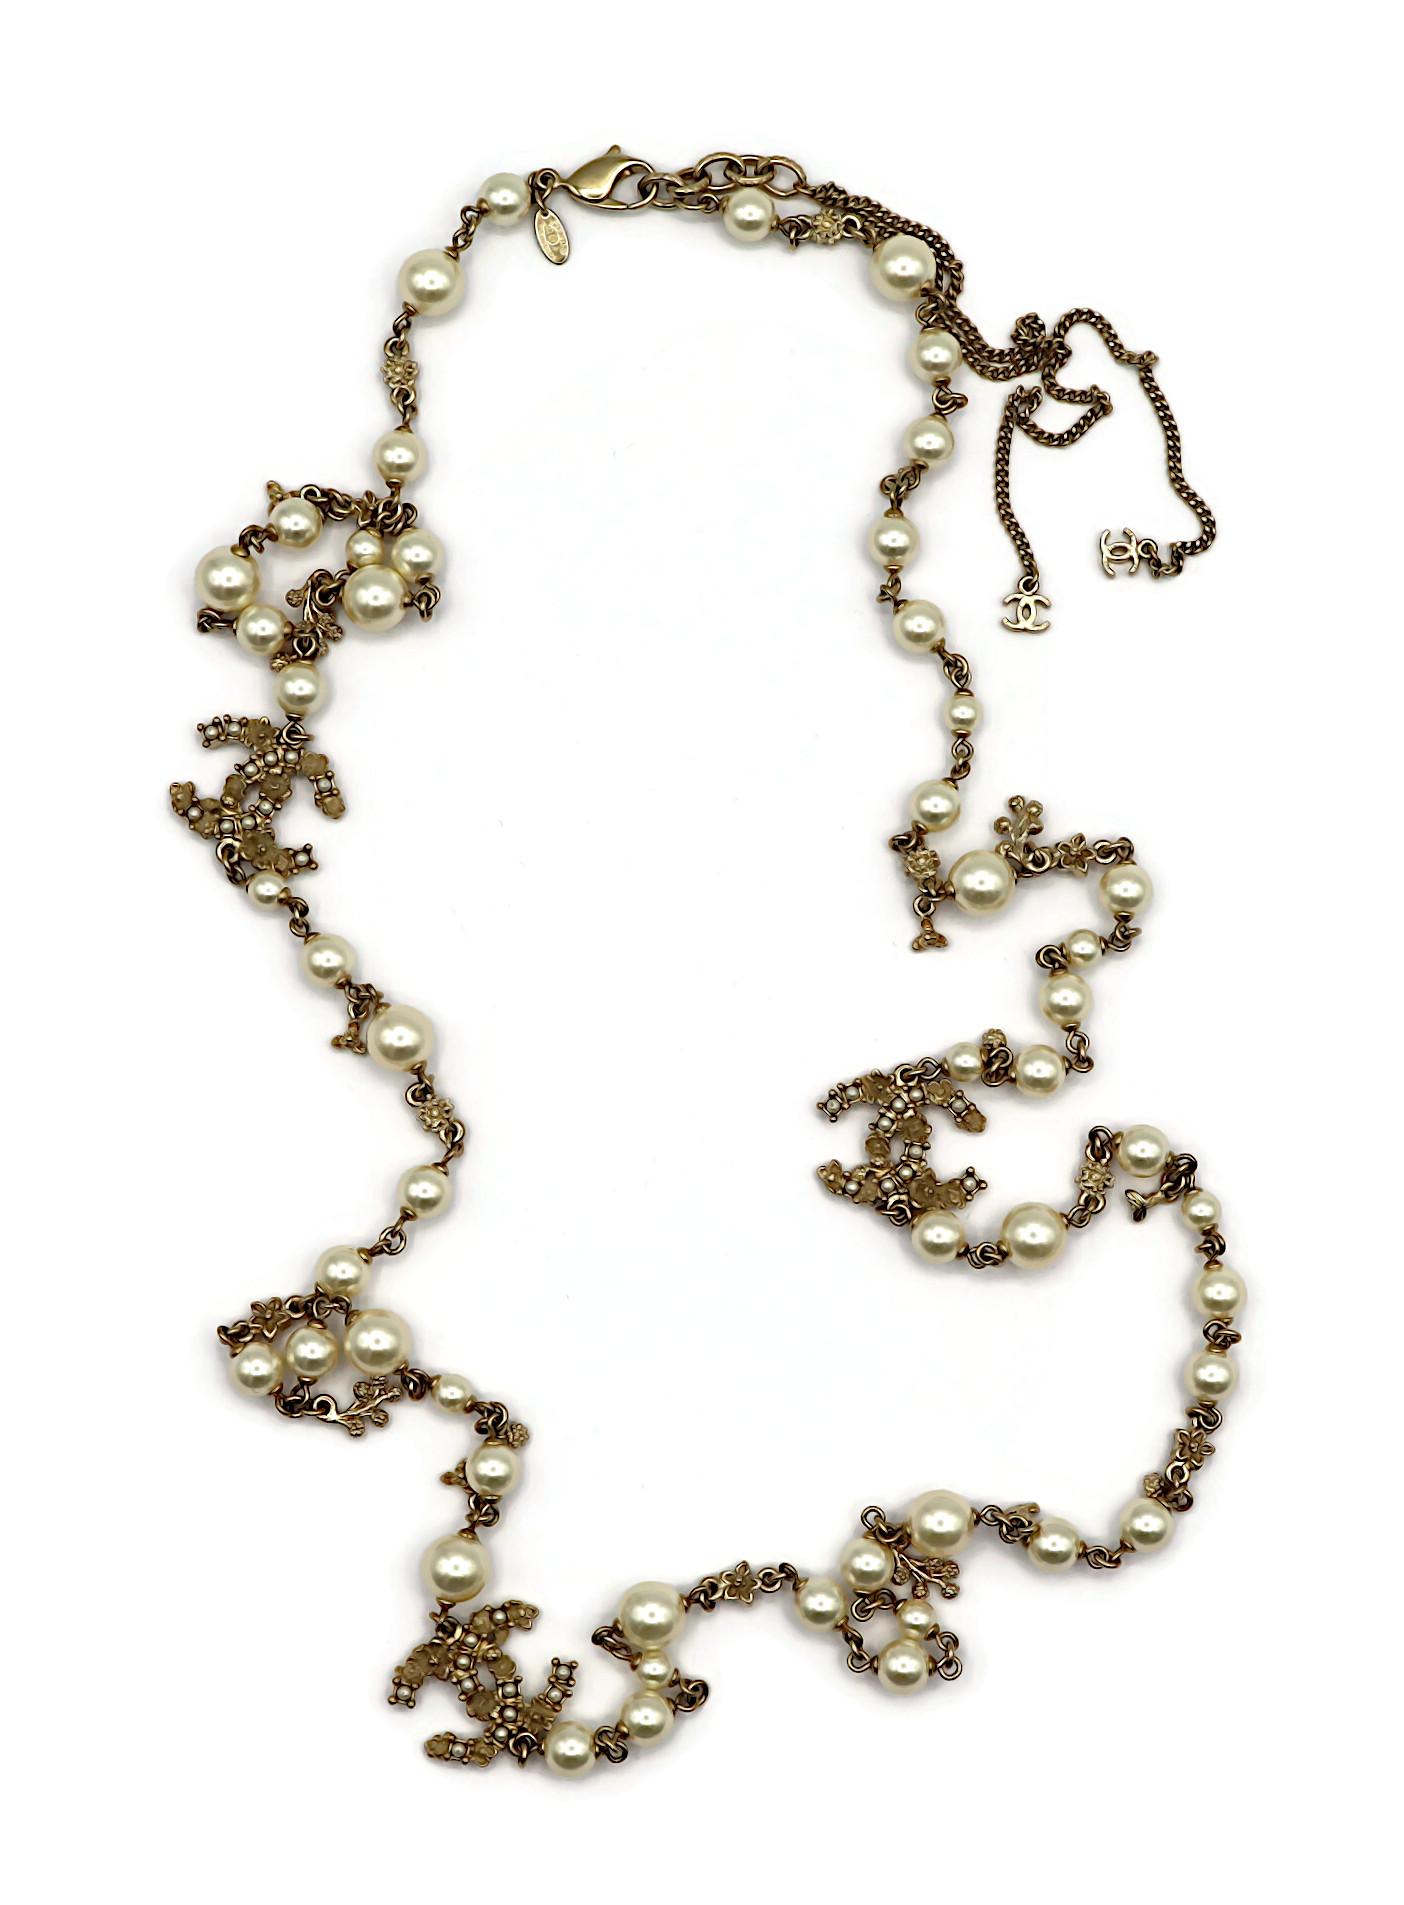 CHANEL by KARL LAGERFELD Faux Pearl CC Logo Necklace, 2012 In Good Condition For Sale In Nice, FR